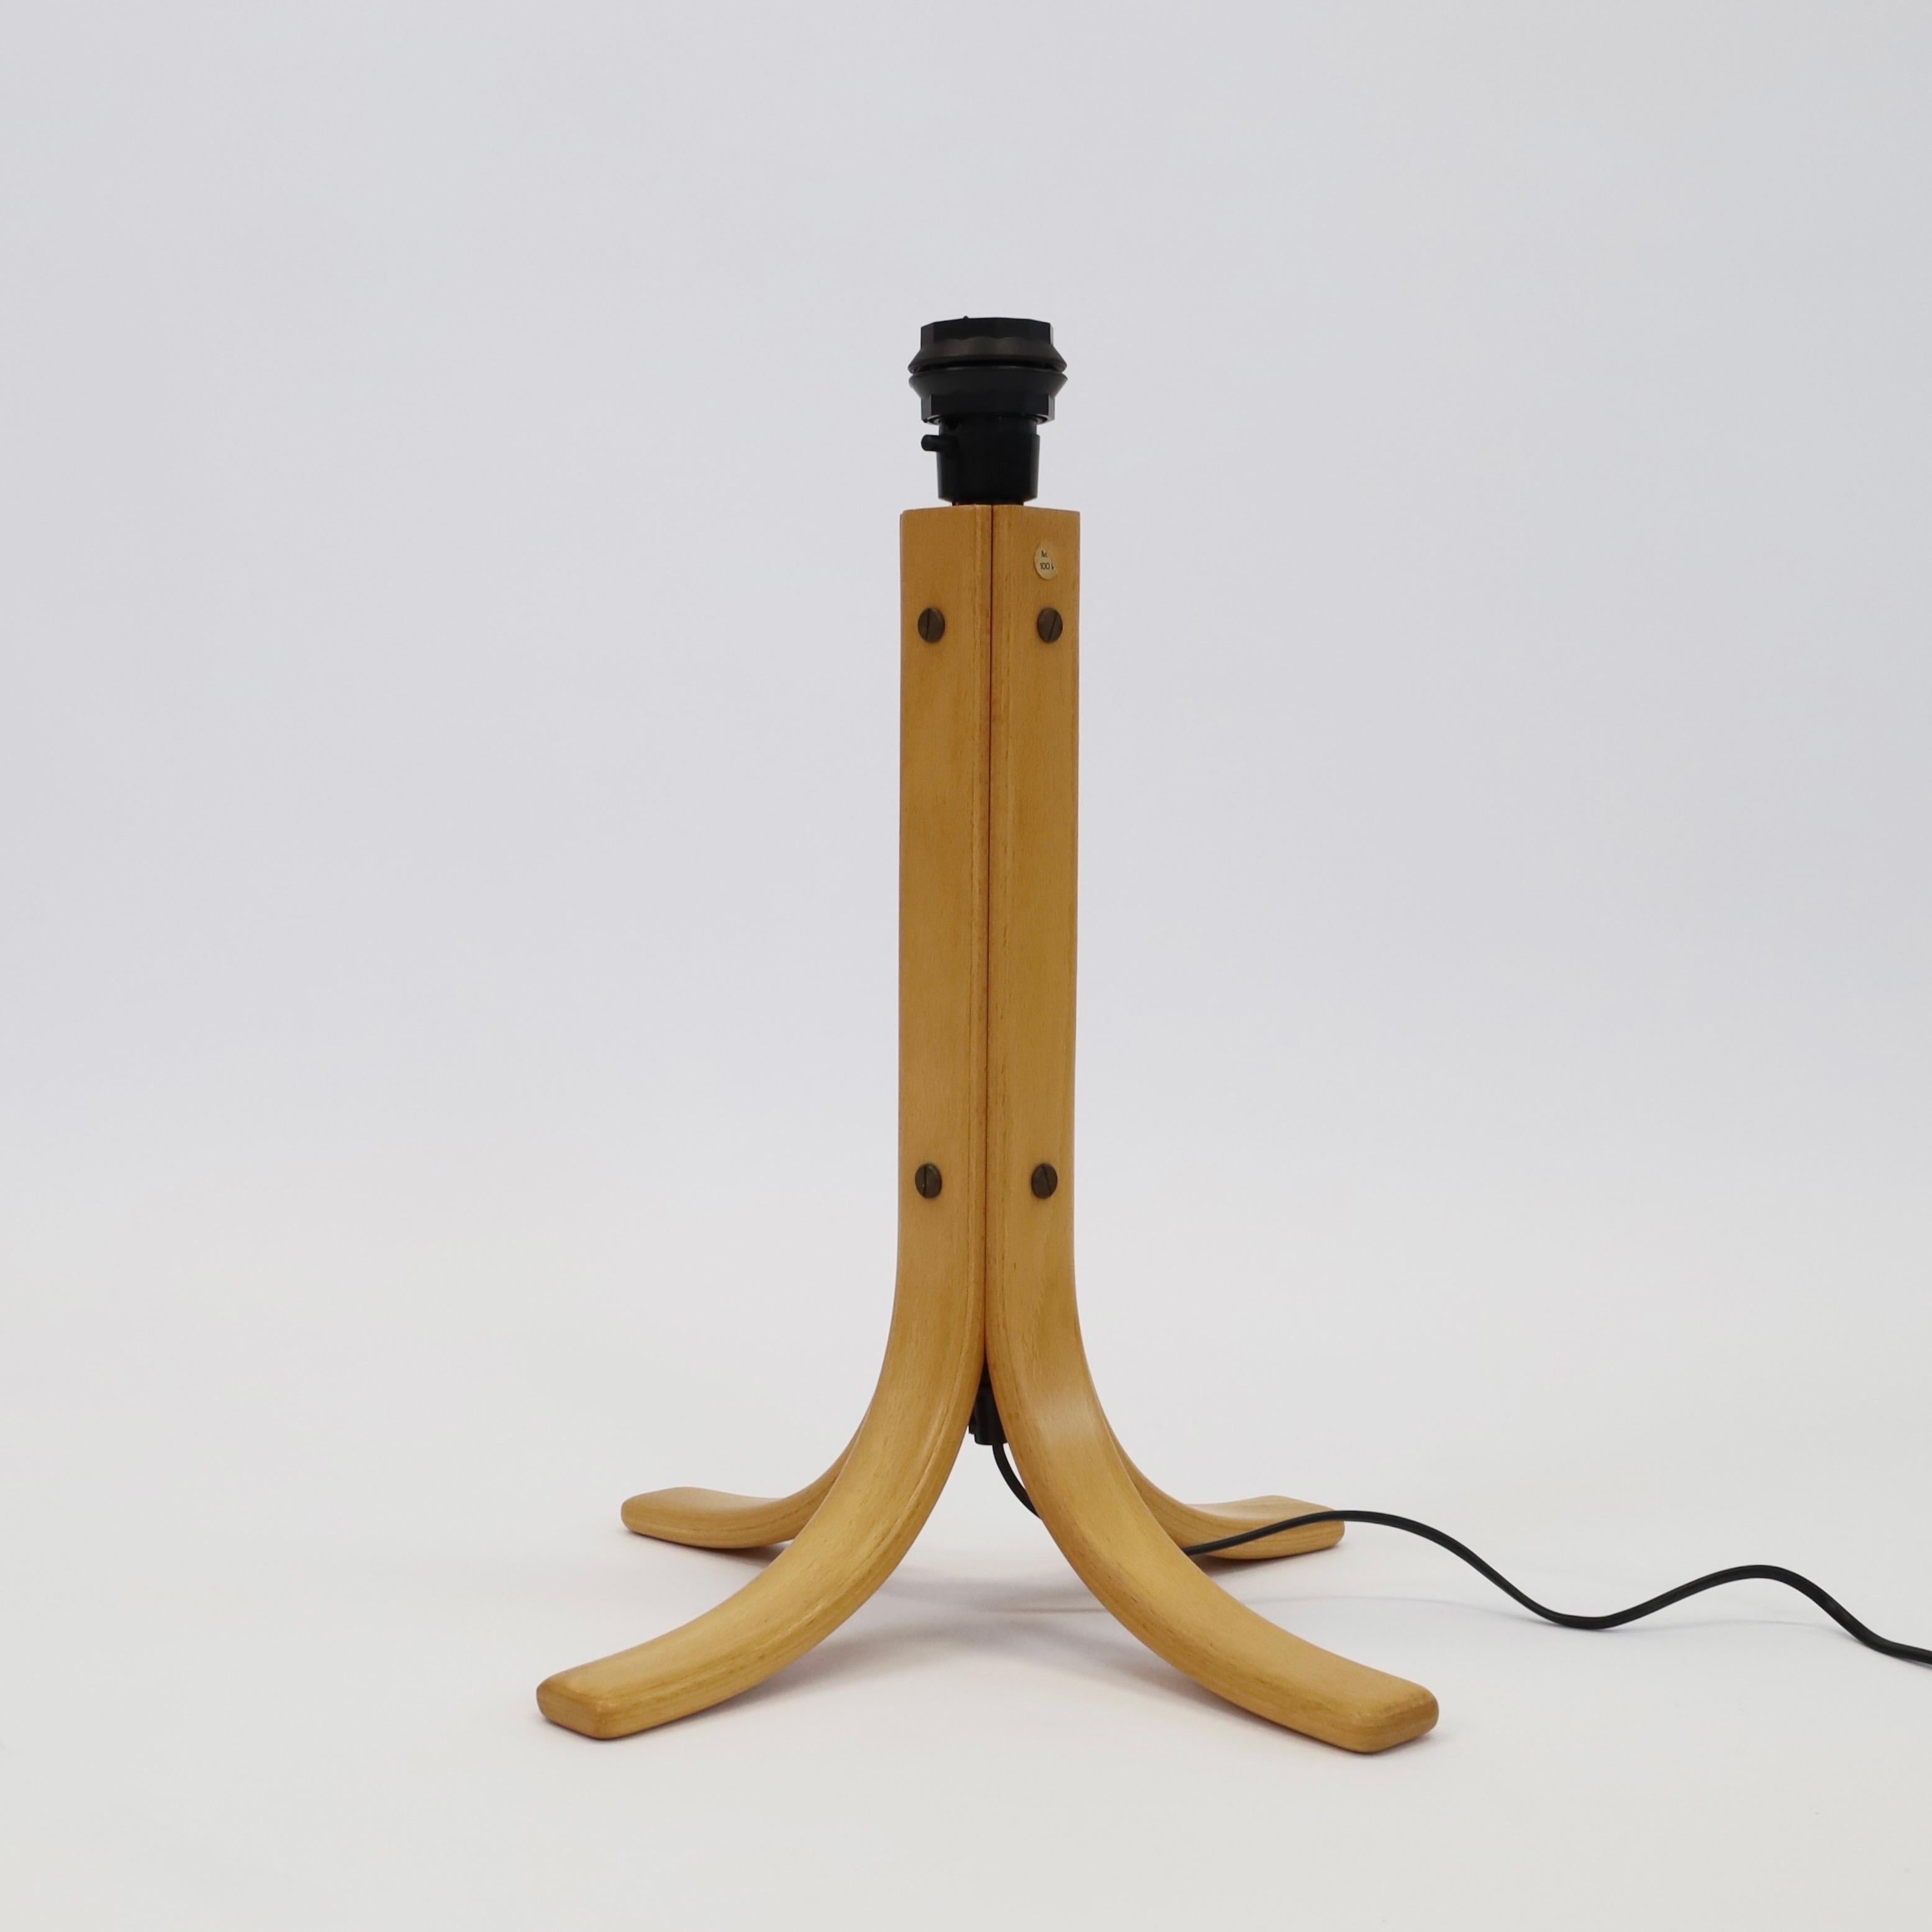 Beech wood and leather Desk Lamp by Anna Ehrner for Atelje Lyktan, 1970s, Sweden For Sale 2